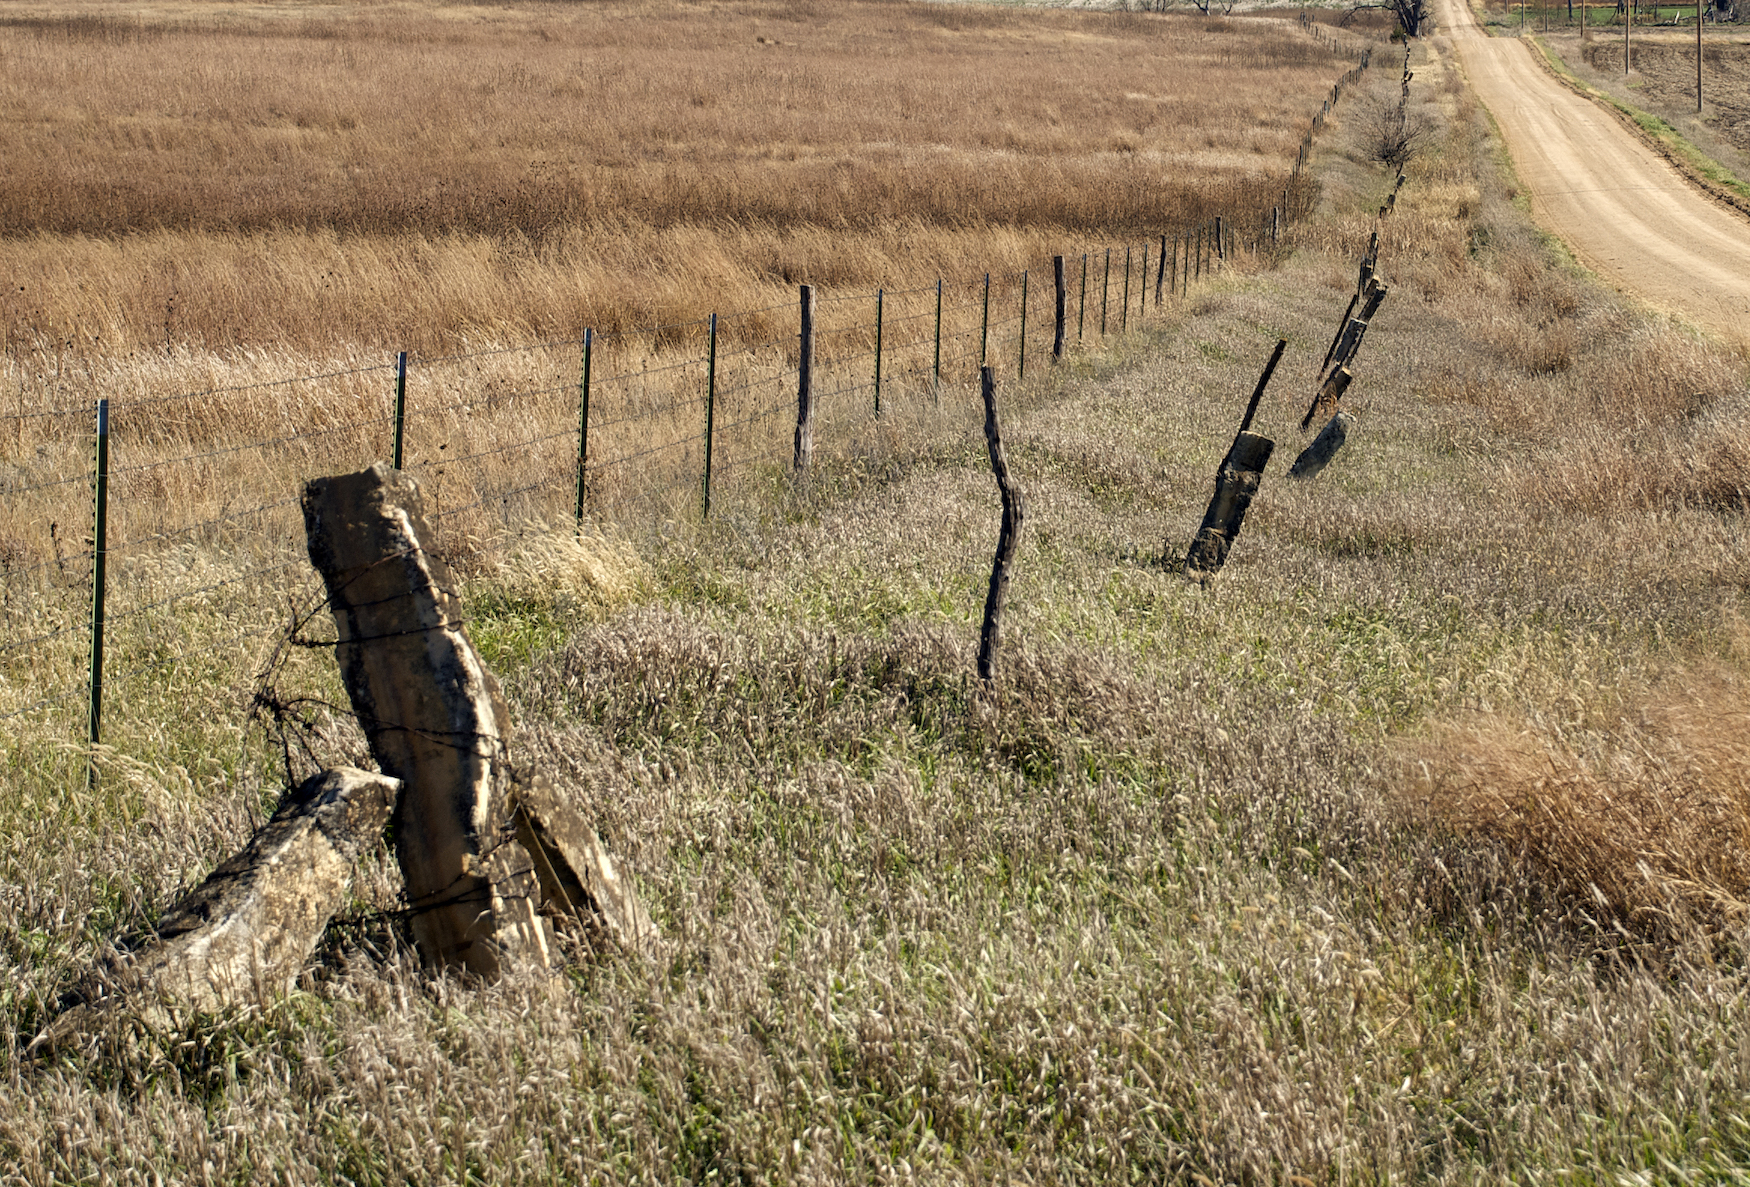 "Fence-post limestone in Lincoln County"